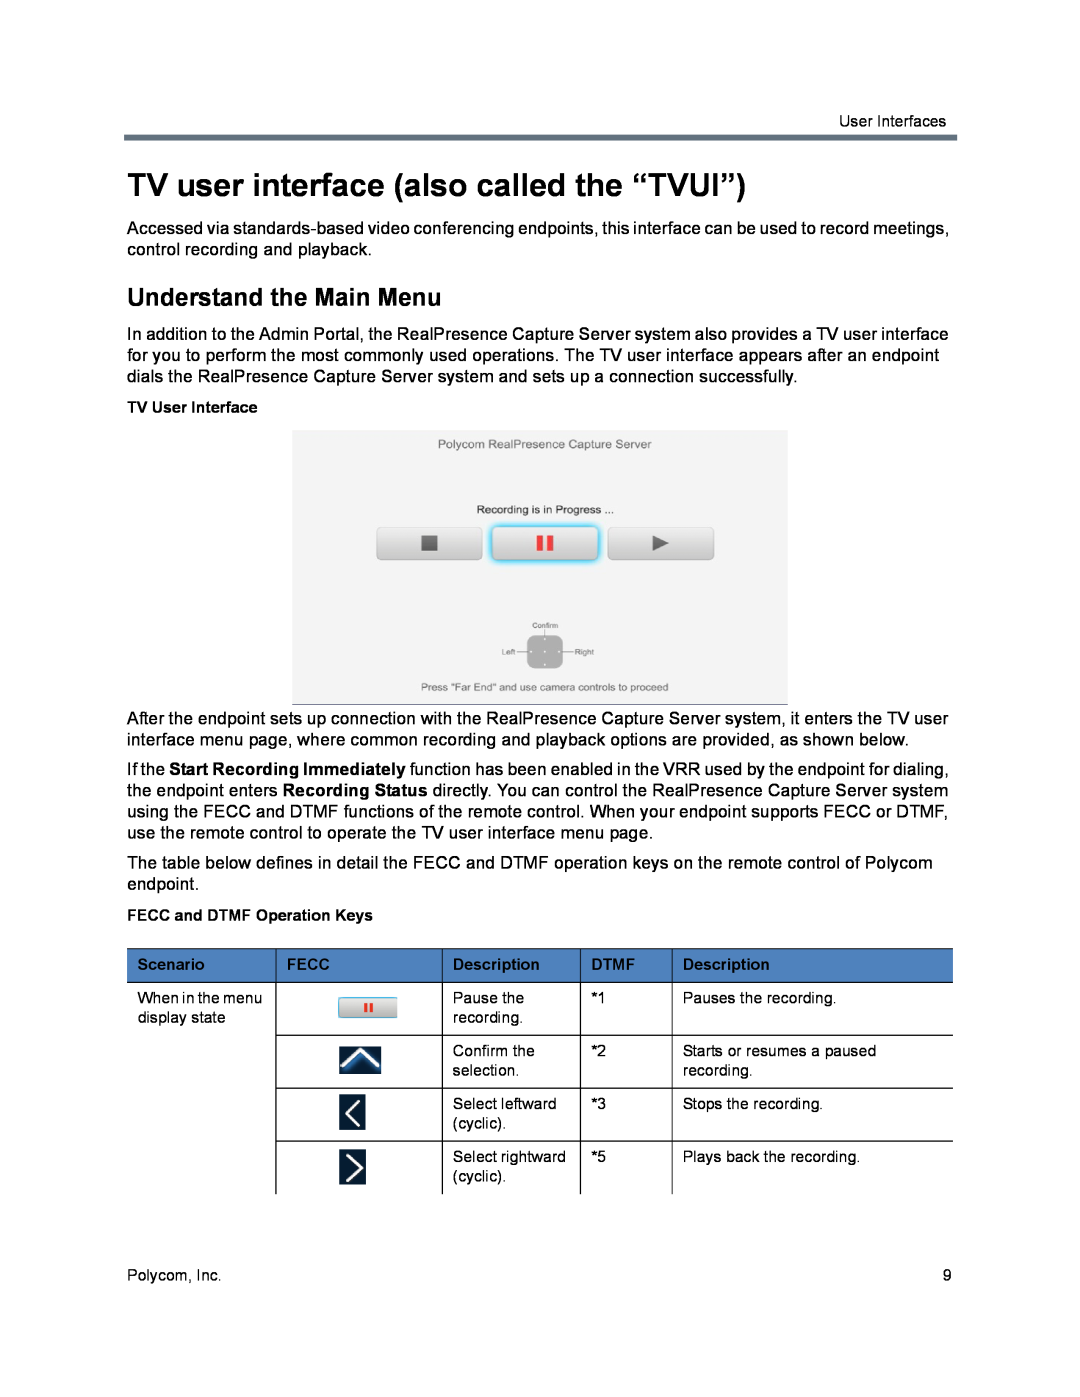 Polycom 40/0 manual TV user interface also called the “TVUI”, Understand the Main Menu 